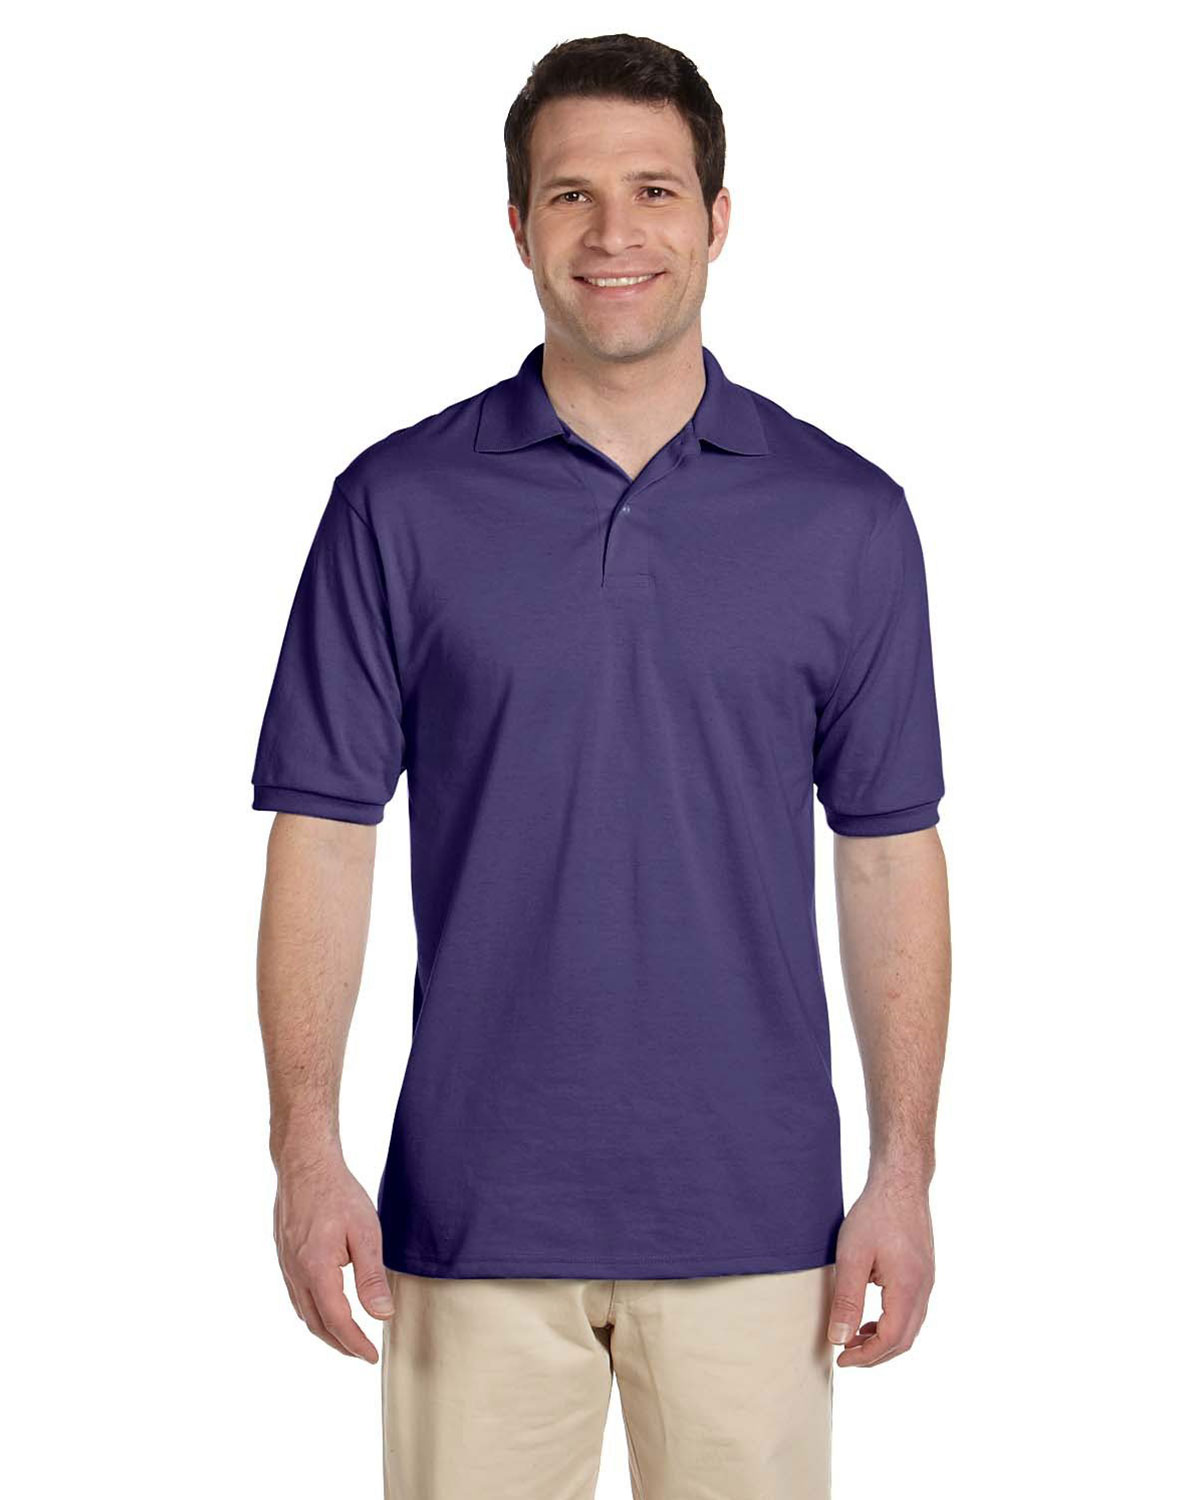 Jerzees 437 Men 5.6 Oz 50/50 Jersey Polo With Spotshield at Apparelstation